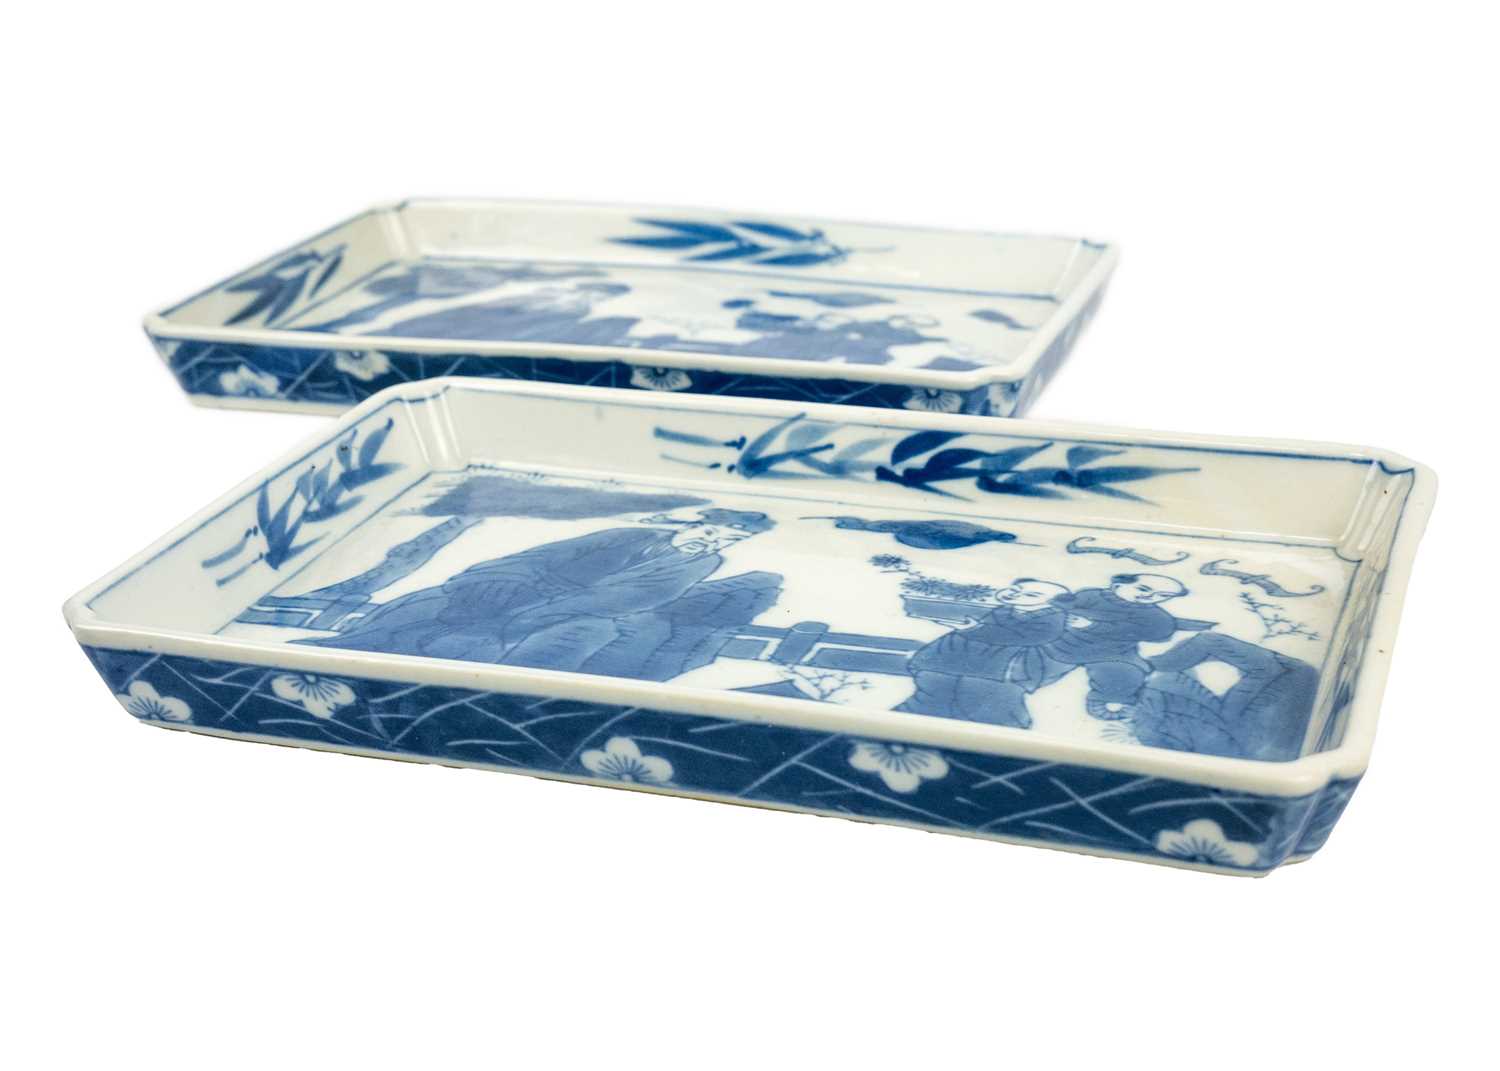 Two similar Chinese blue and white porcelain dishes, early 20th century. - Image 2 of 3